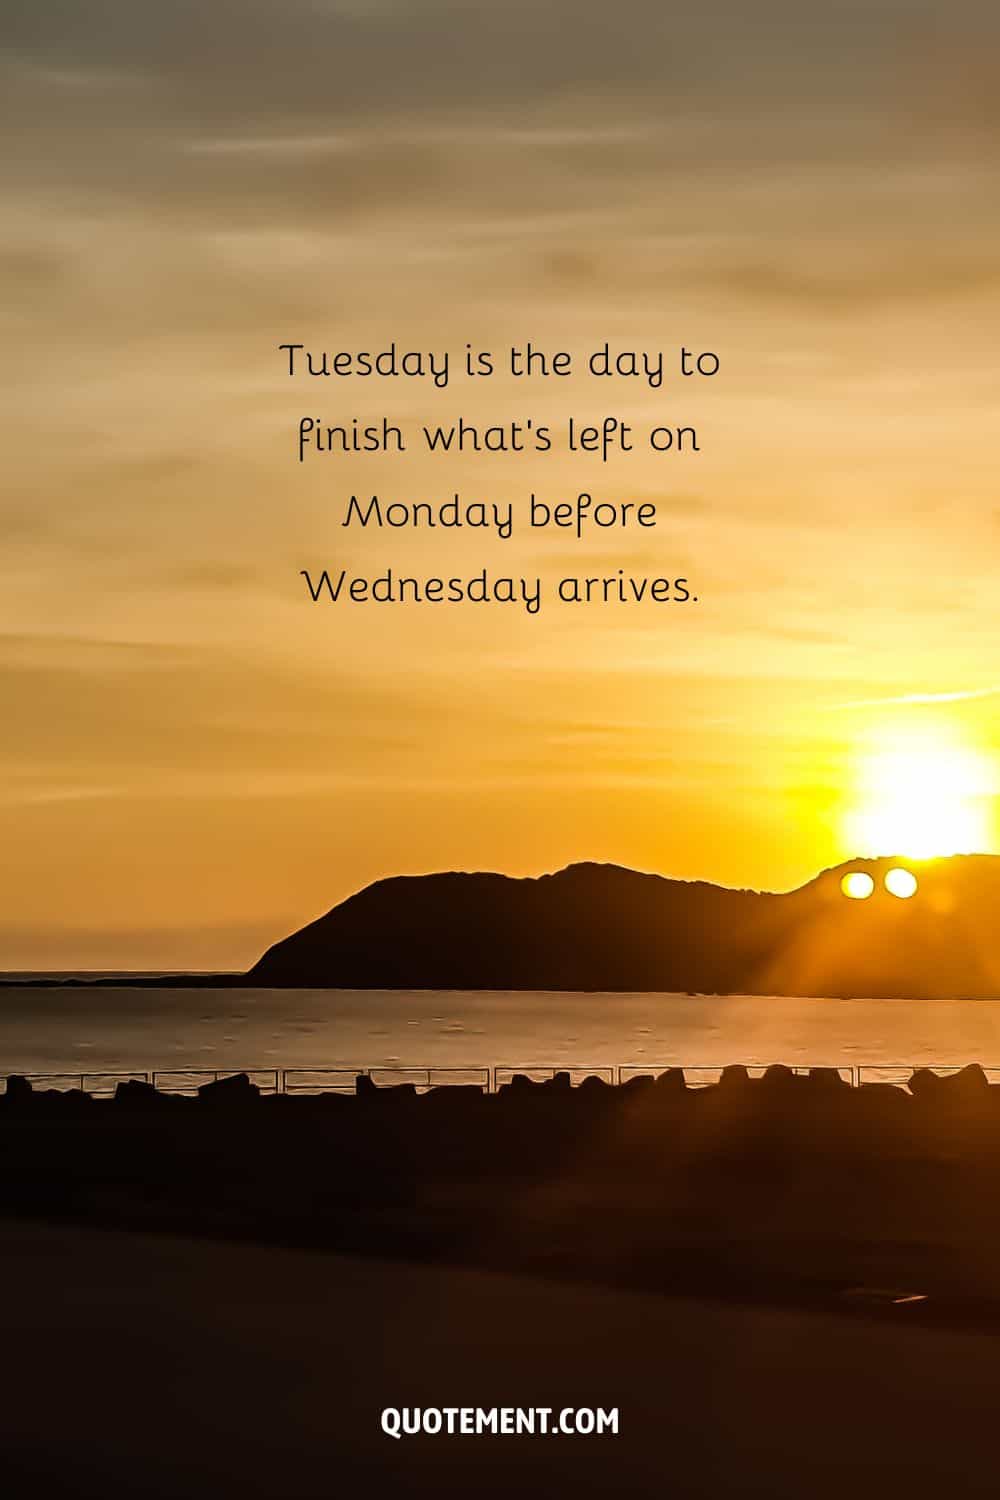 “Tuesday is the day to finish what’s left on Monday before Wednesday arrives.” — Unknown